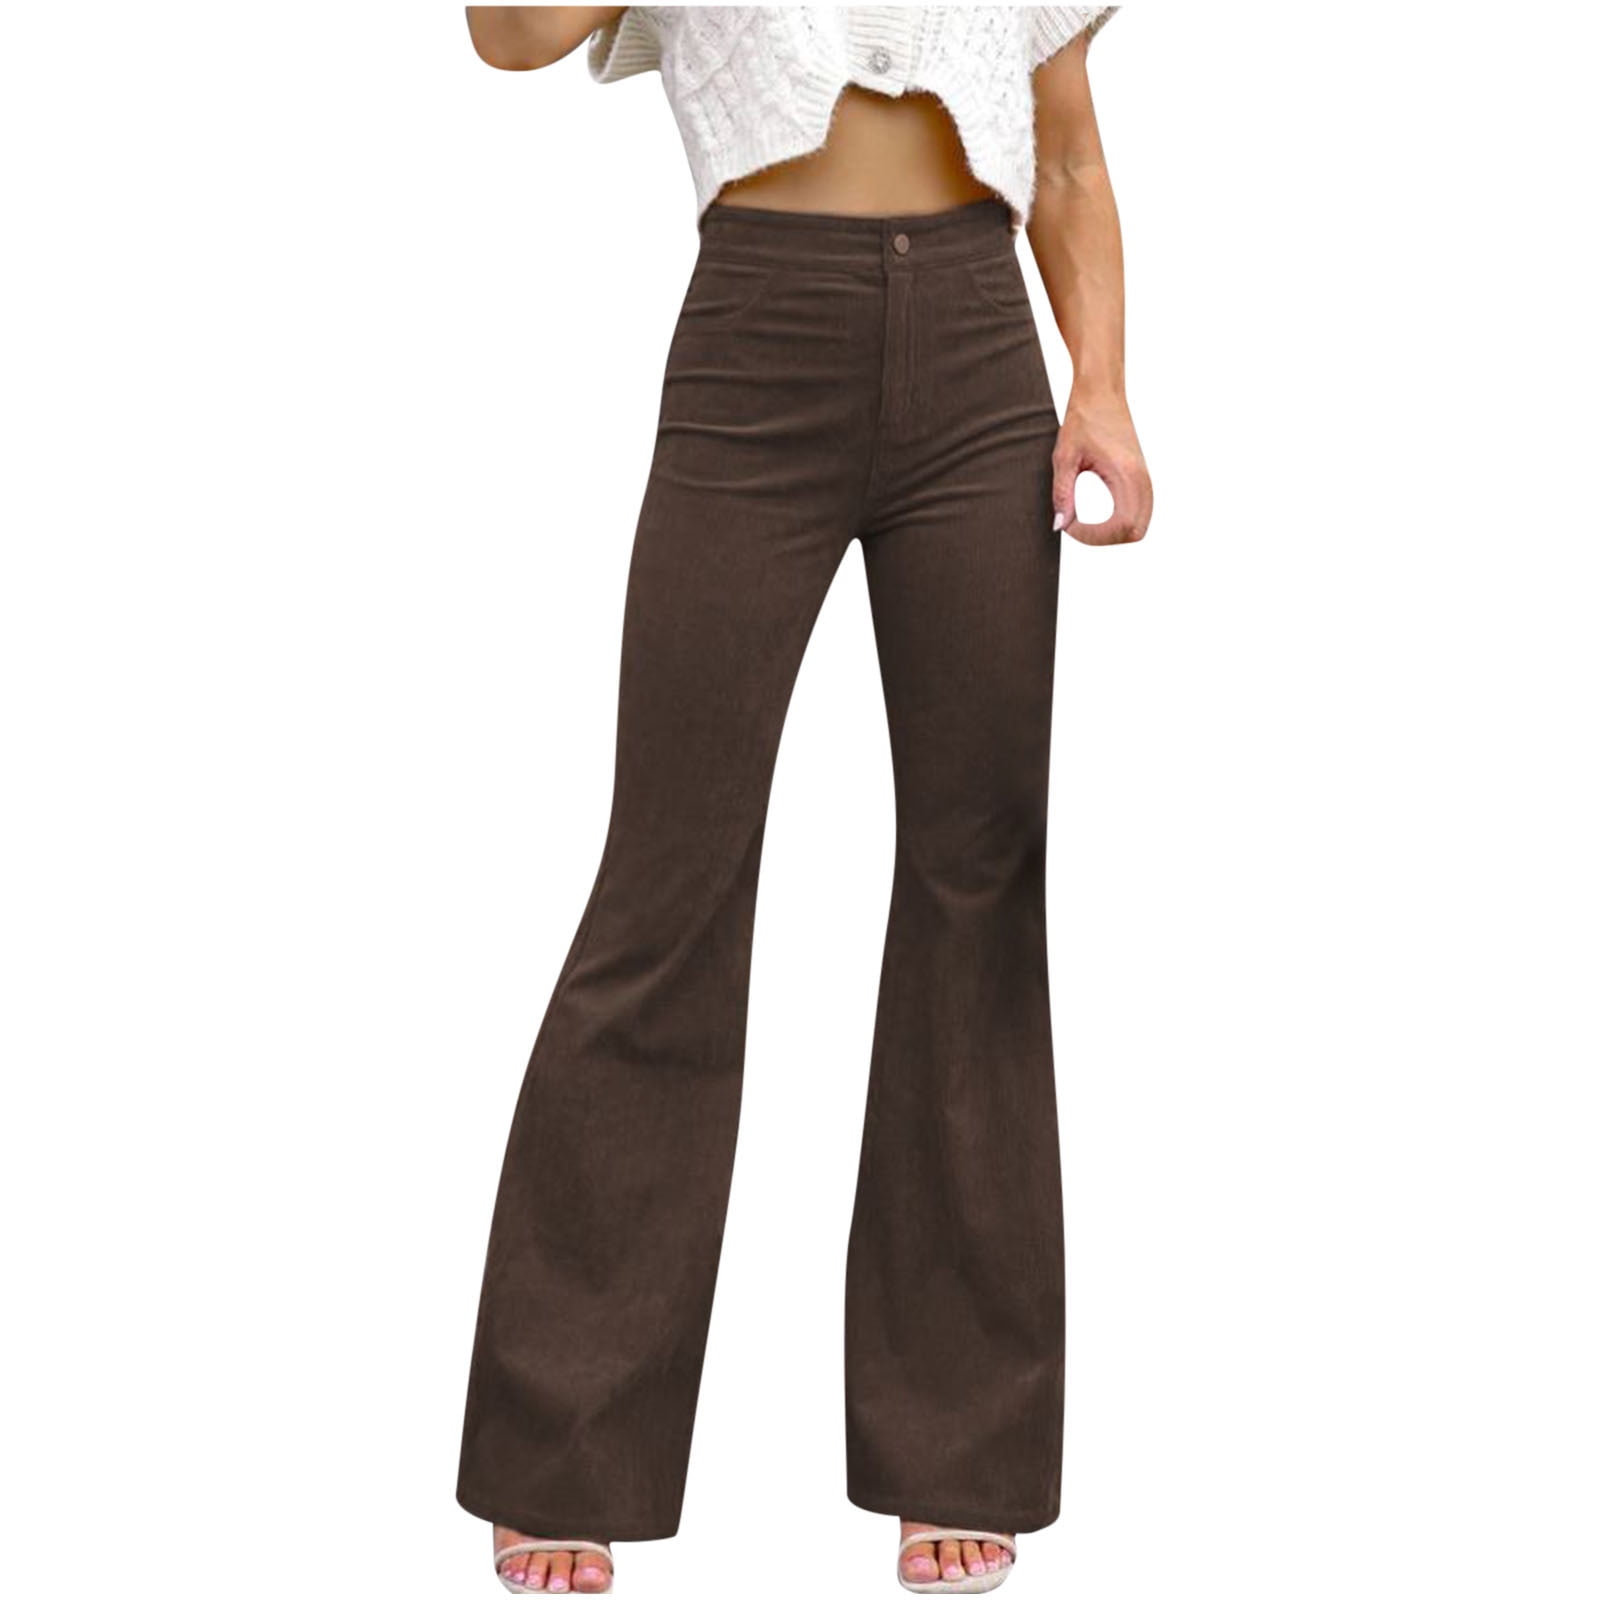 XFLWAM Women's High Waist Flare Pants Casual Wide Leg Bell Bottom Leggings  Trousers Solid Color Plus Size Loose Comfy Lounge Pants with Pockets Brown  3XL 